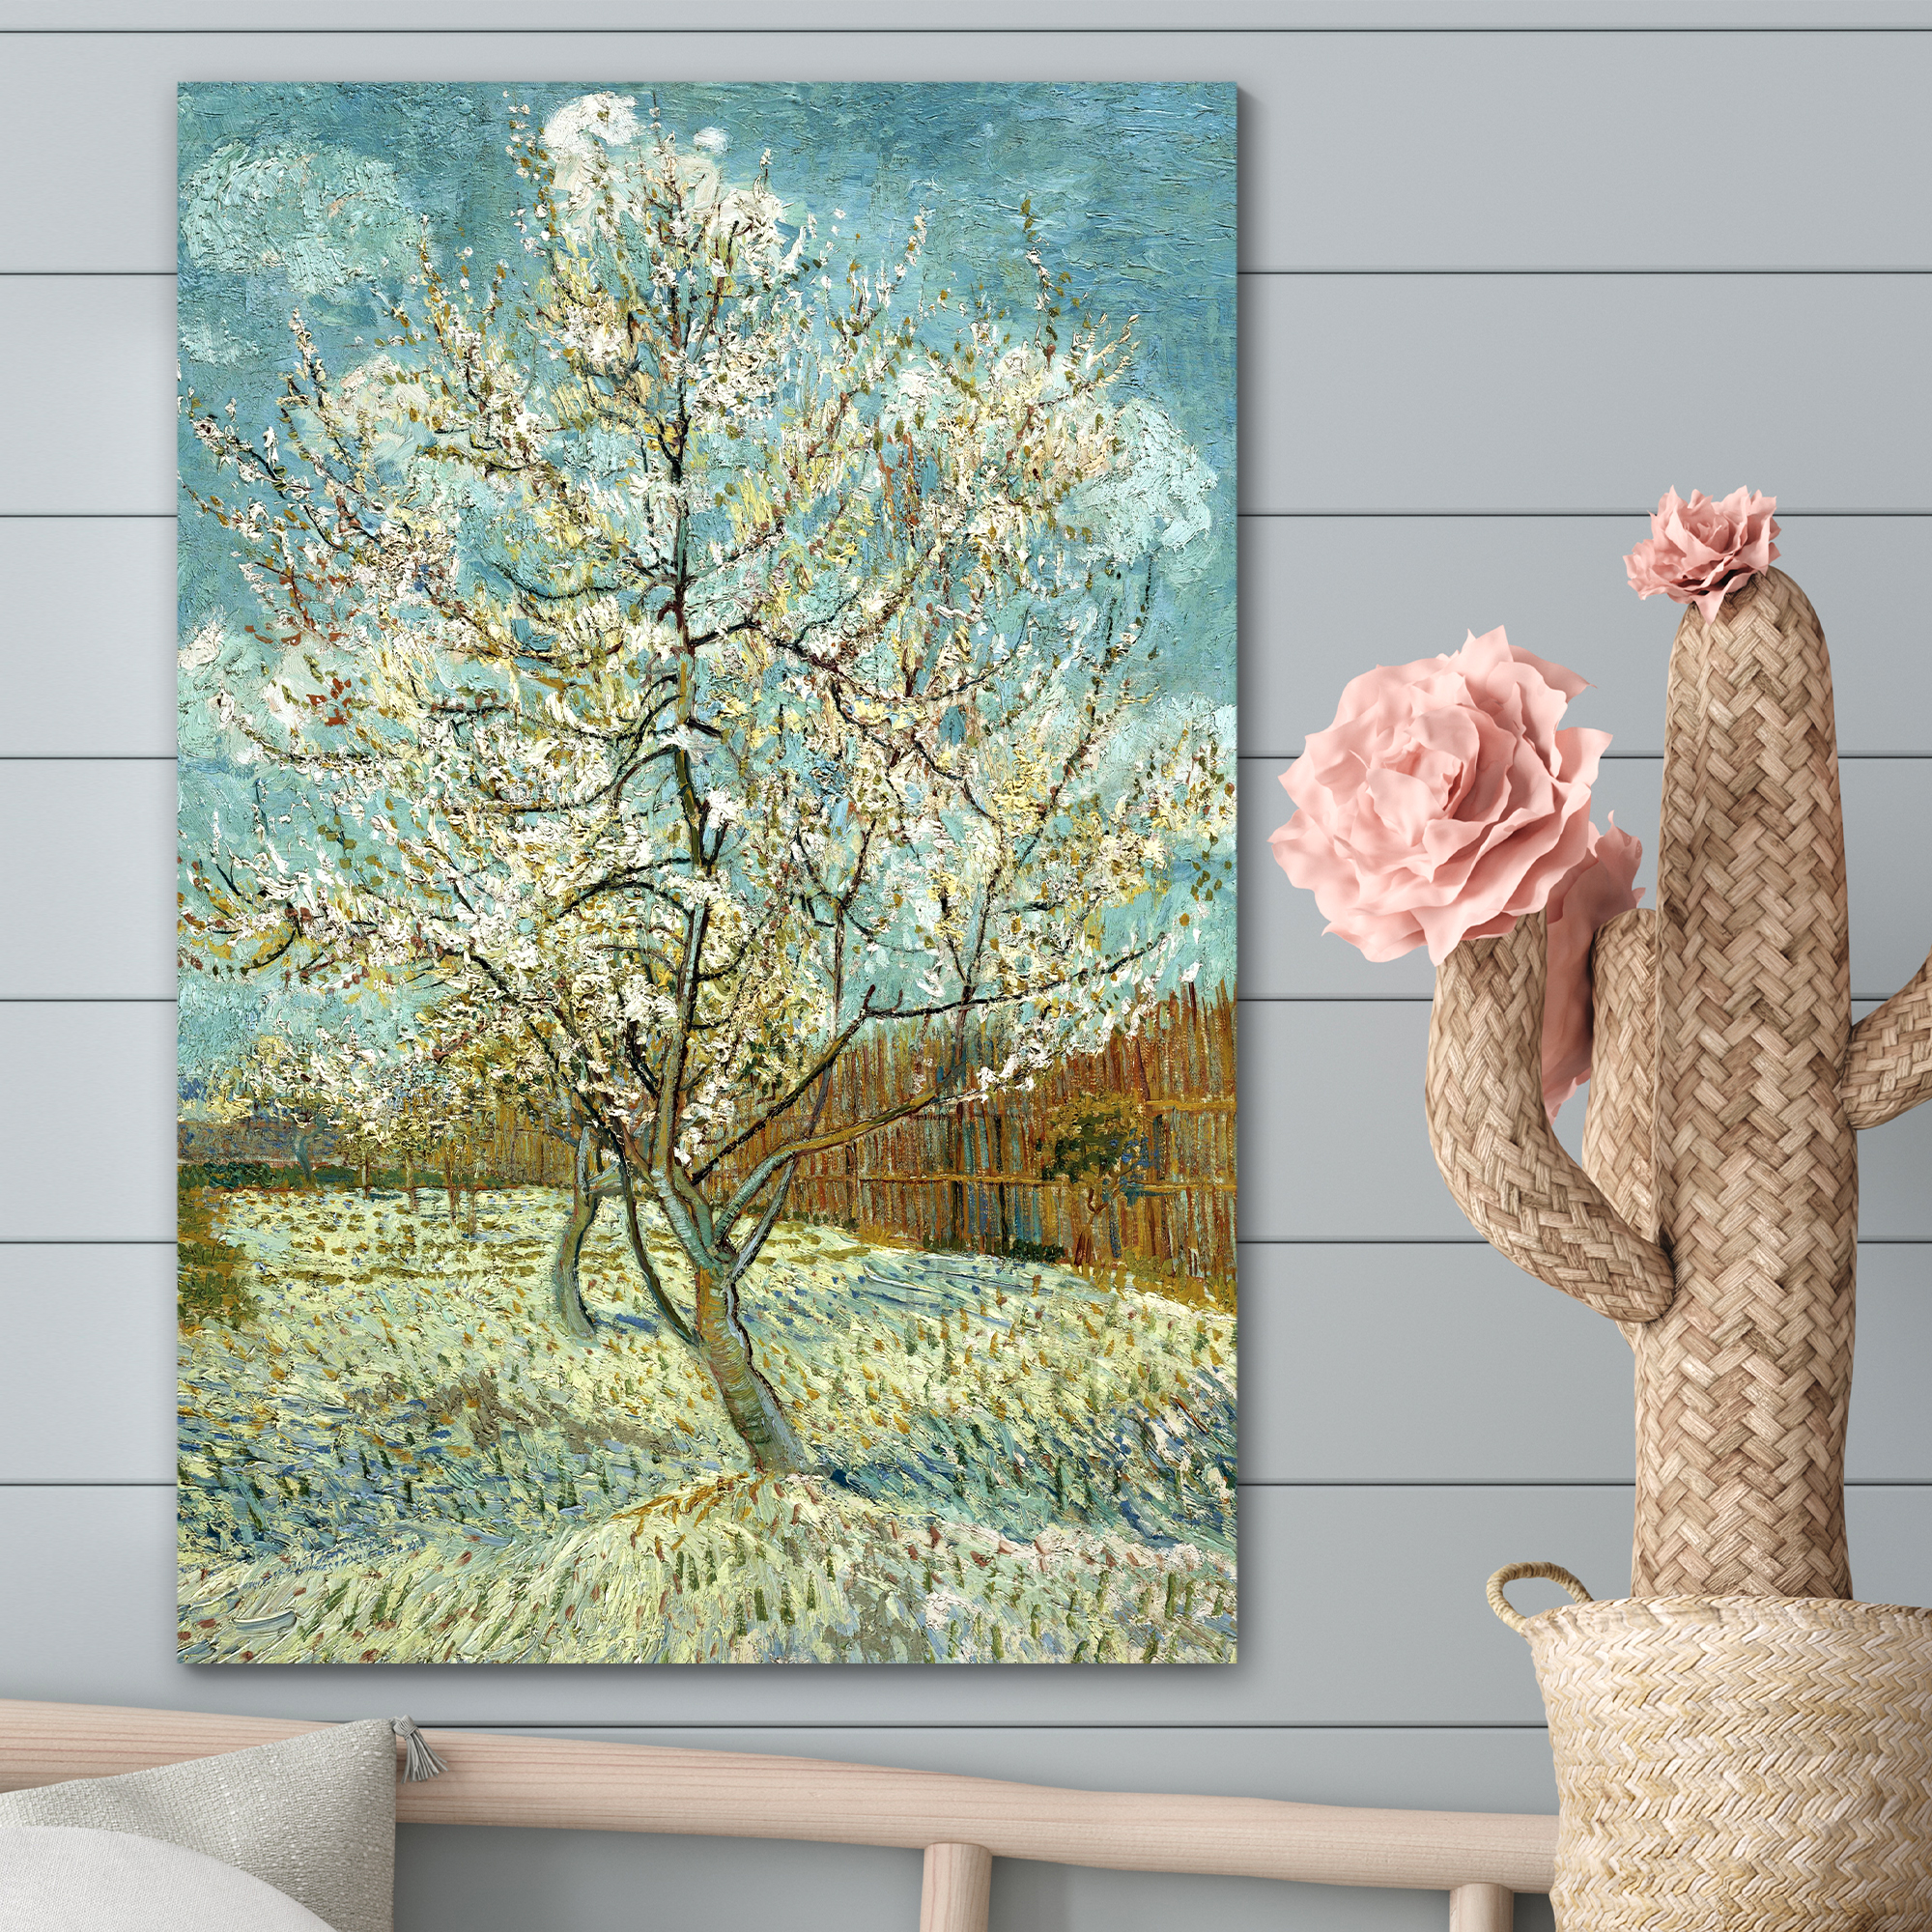 The Pink Peach Tree by Vincent Van Gogh - Canvas Print Wall Art Famous Oil Painting Reproduction - 12